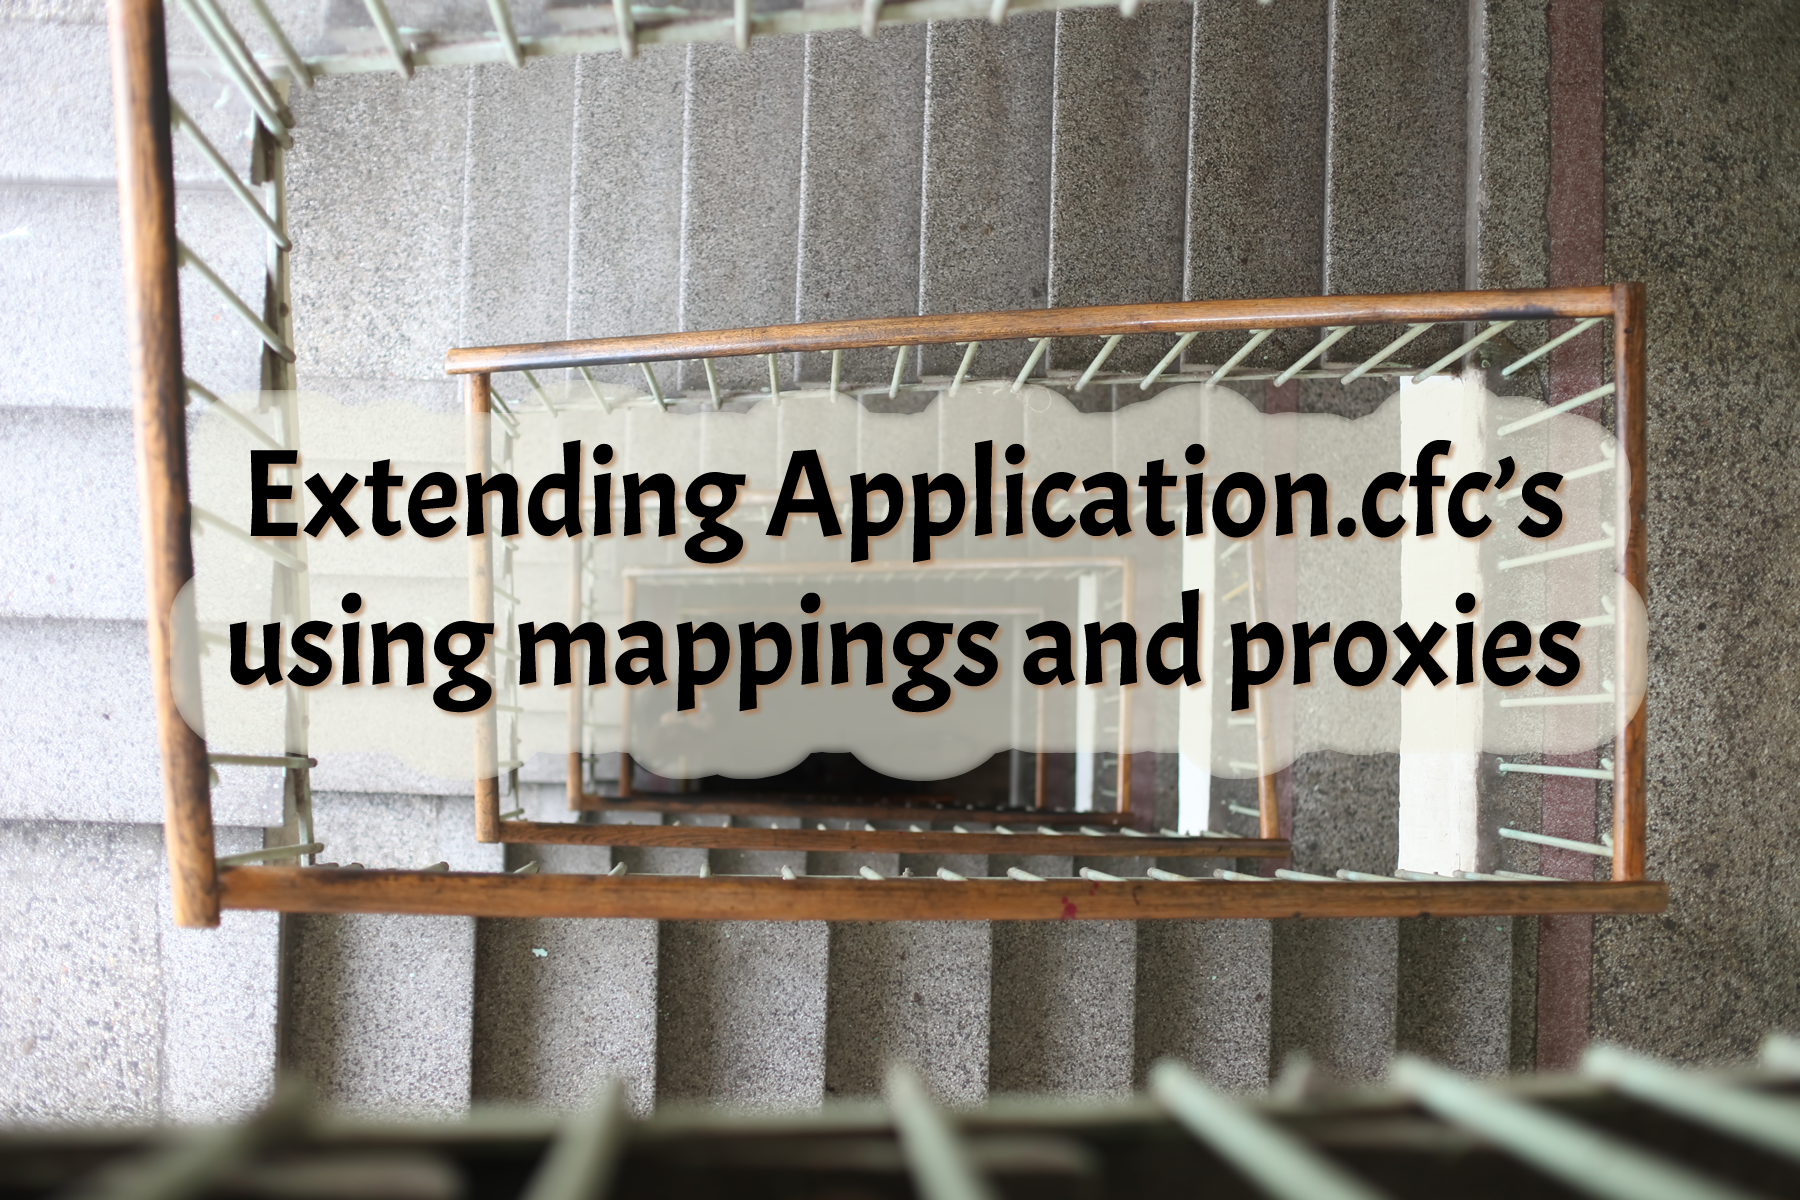 Extending Application.cfc's using mappings and proxies